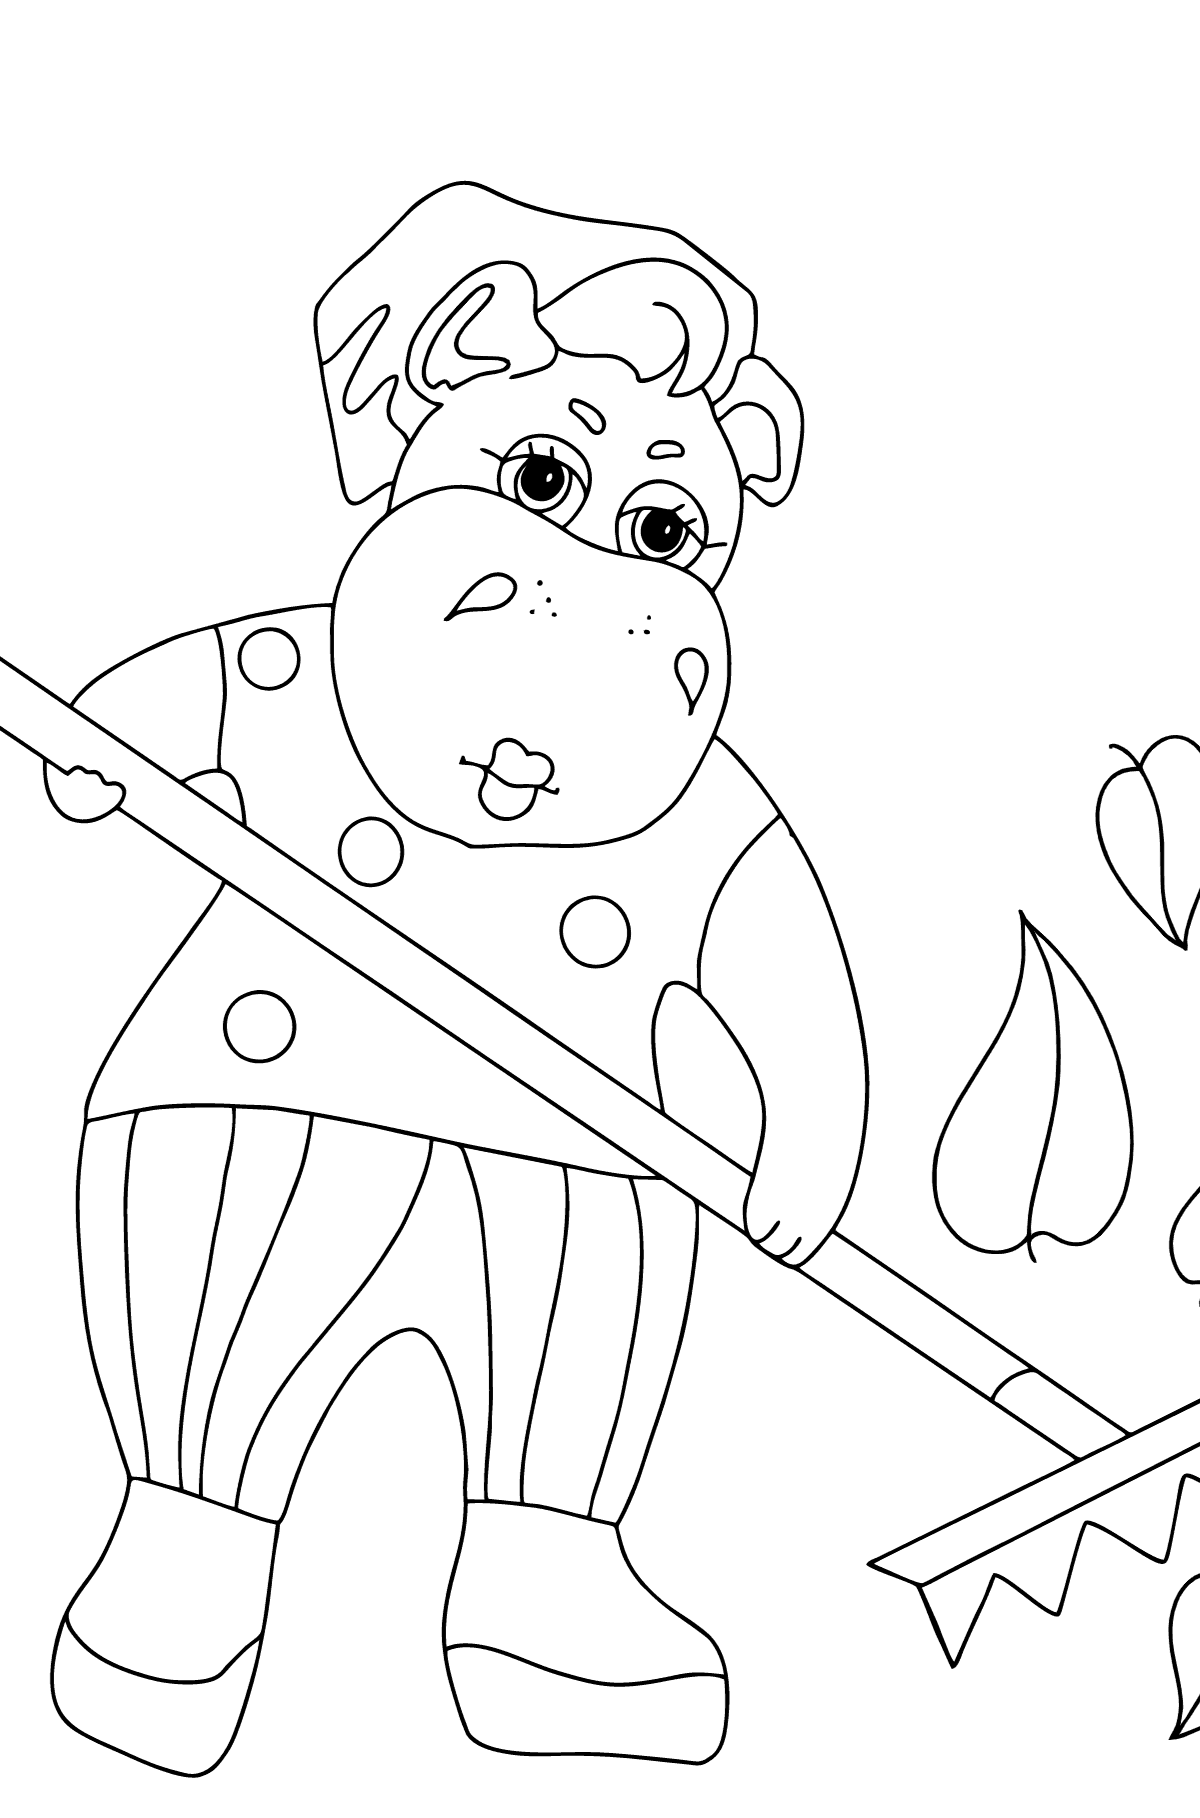 Cute hippo coloring page - Coloring Pages for Kids